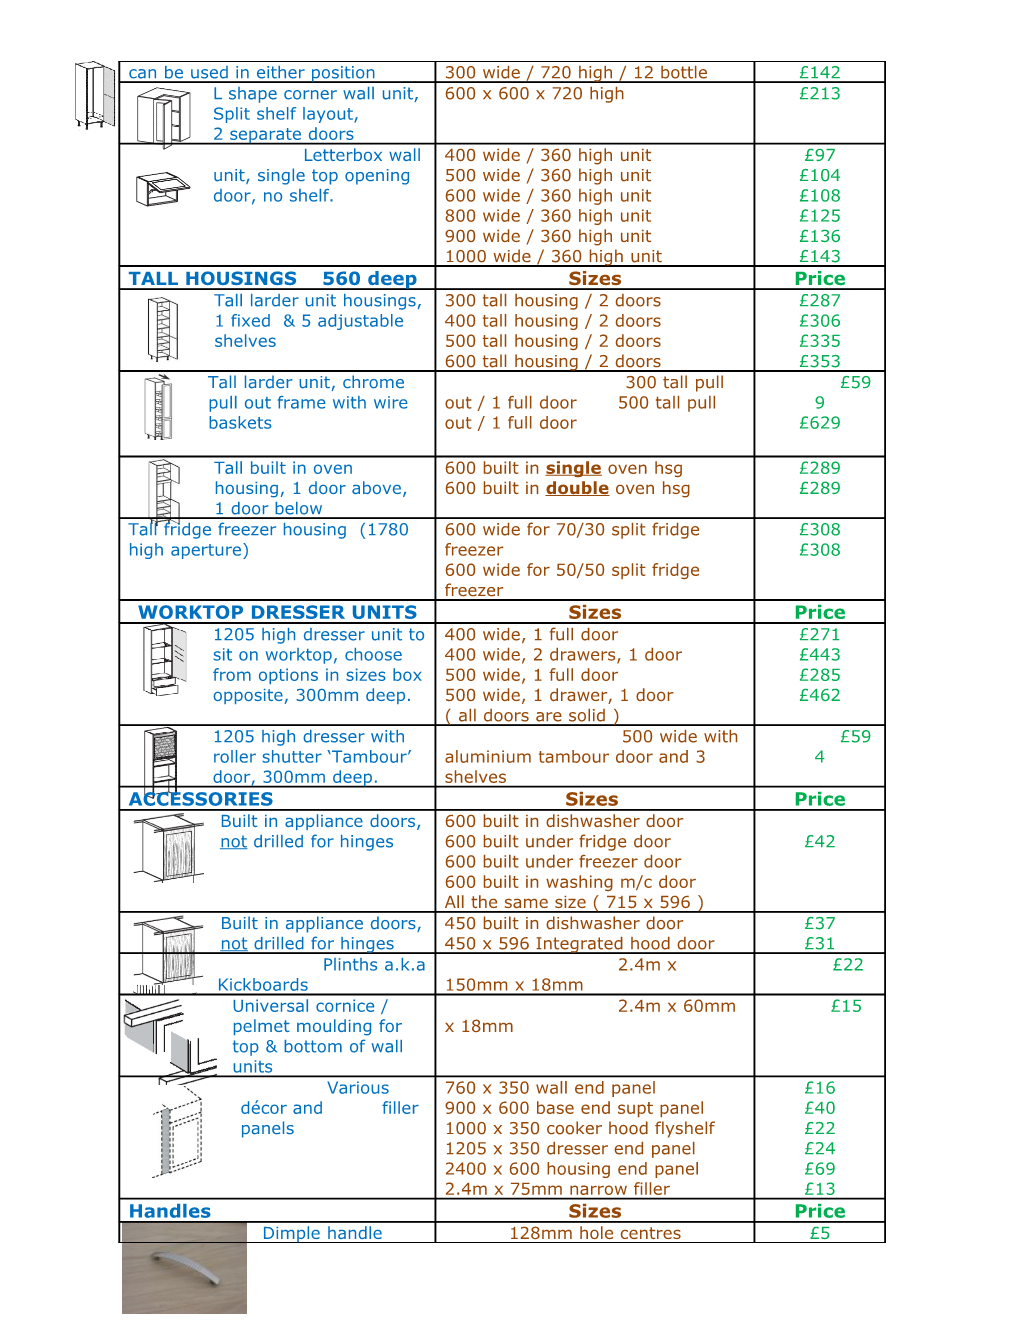 This List of Units Shown Below Provides a Versatile Selection of Sizes to Plan Your Kitchen